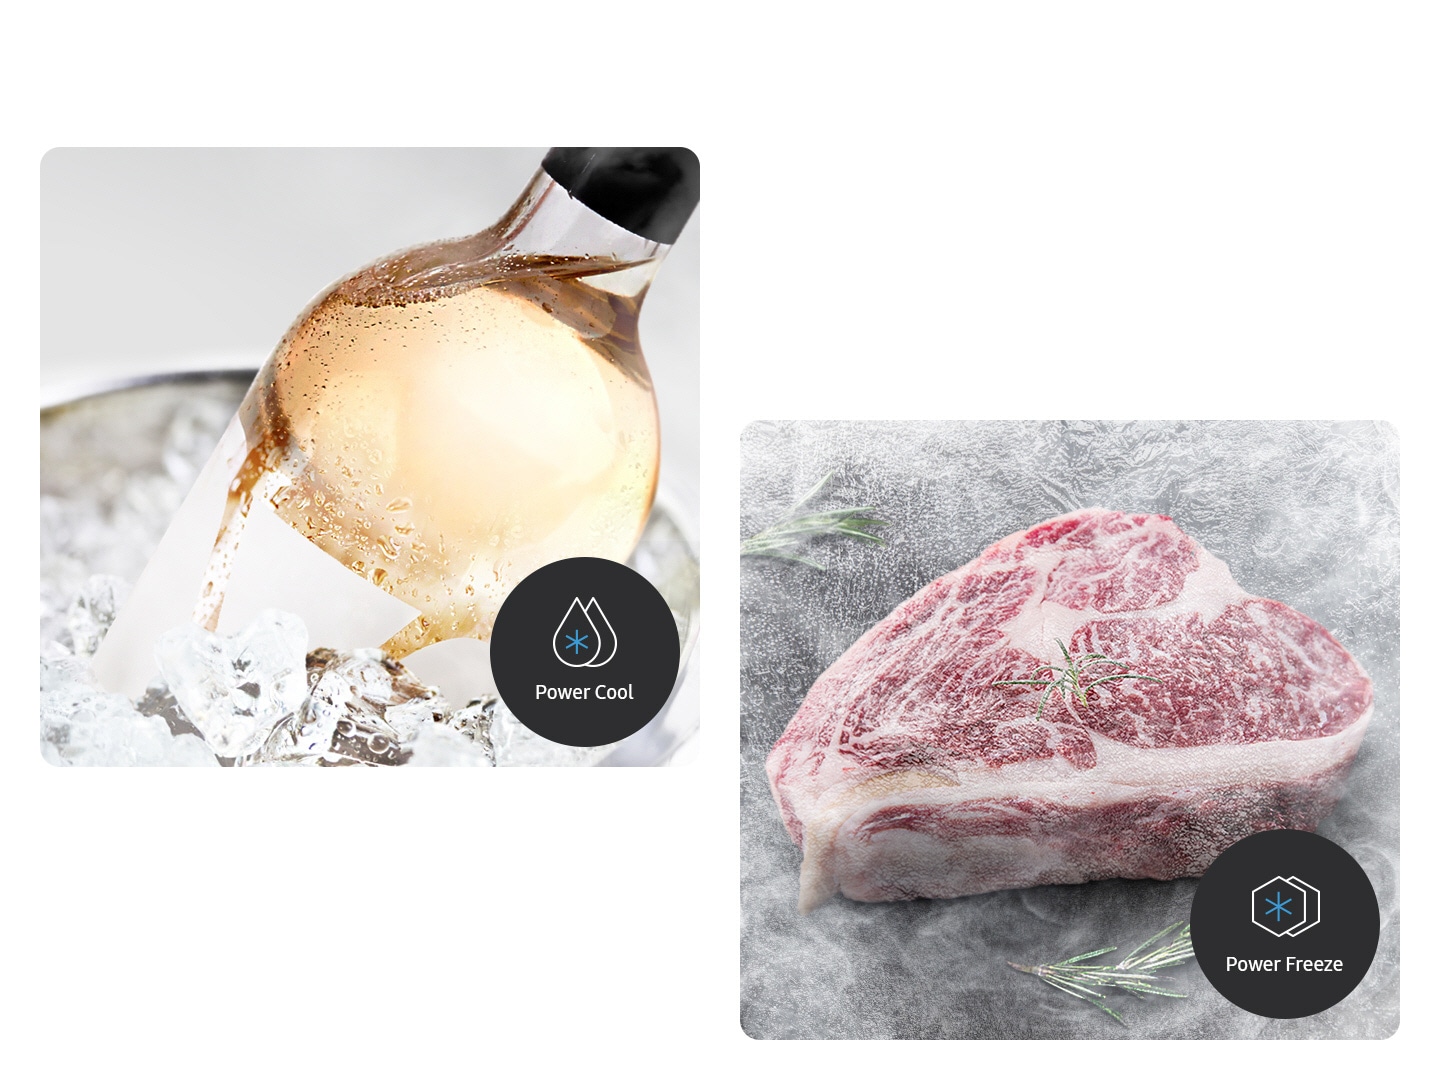 A bottle of white wine is being chilled in ice with Power Cool, and a steak is being frozen quickly with Power Freeze.